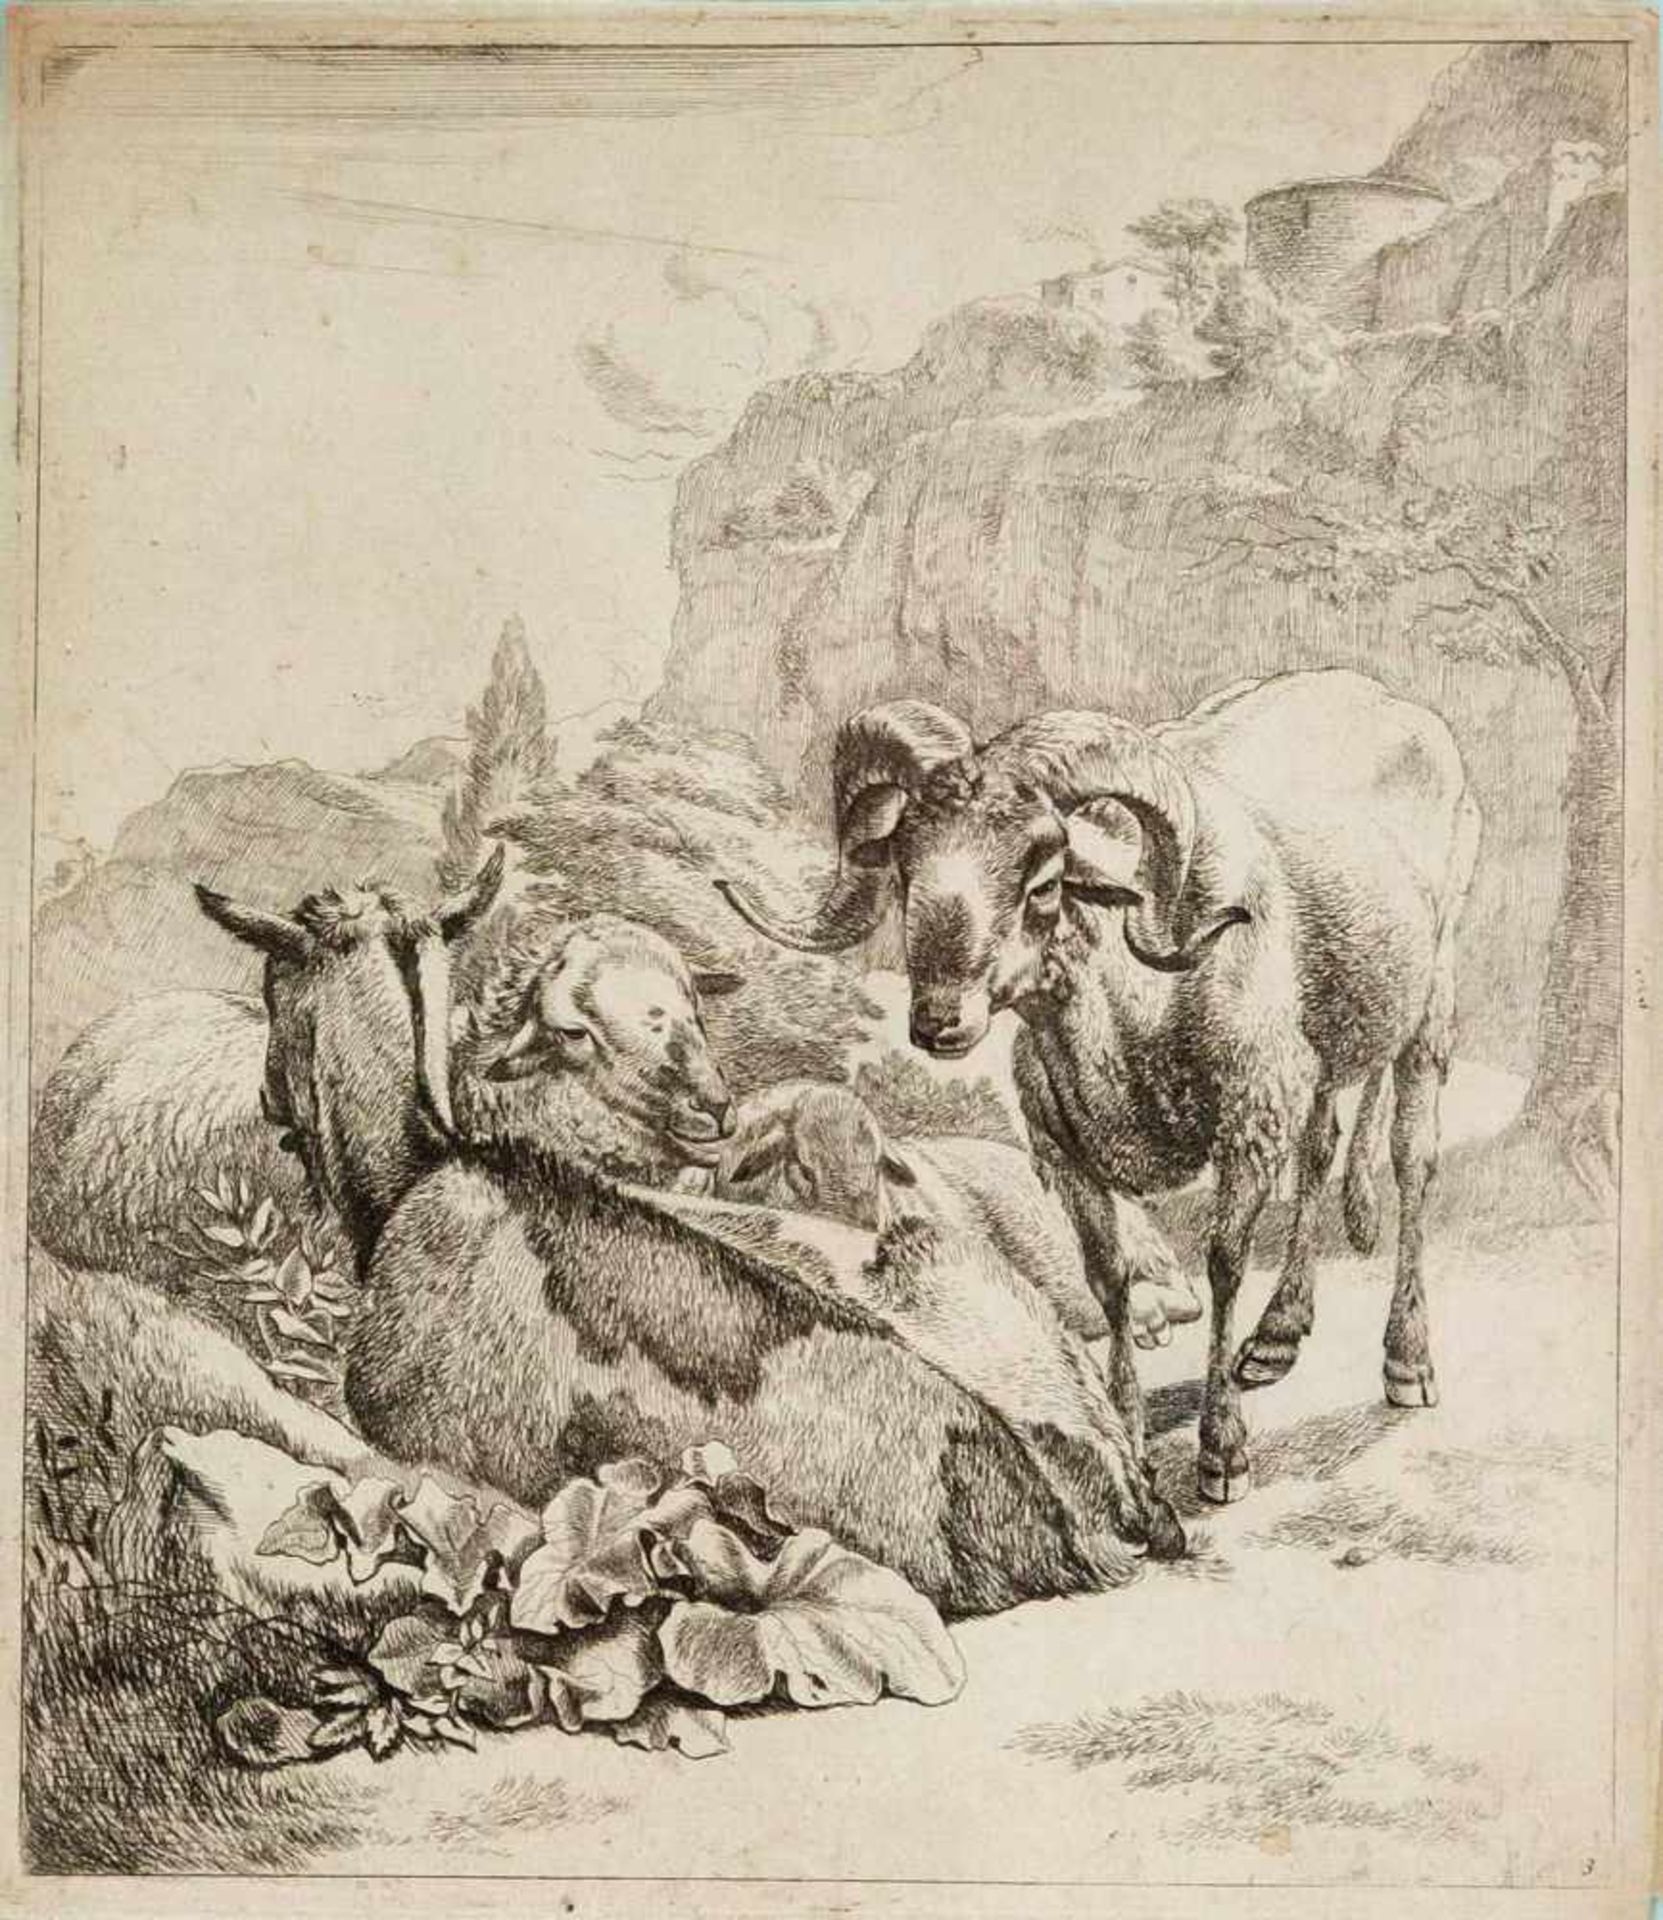 Johann Heinrich Roos (1631-1685), standing ram with resting goat and two sheep, etching